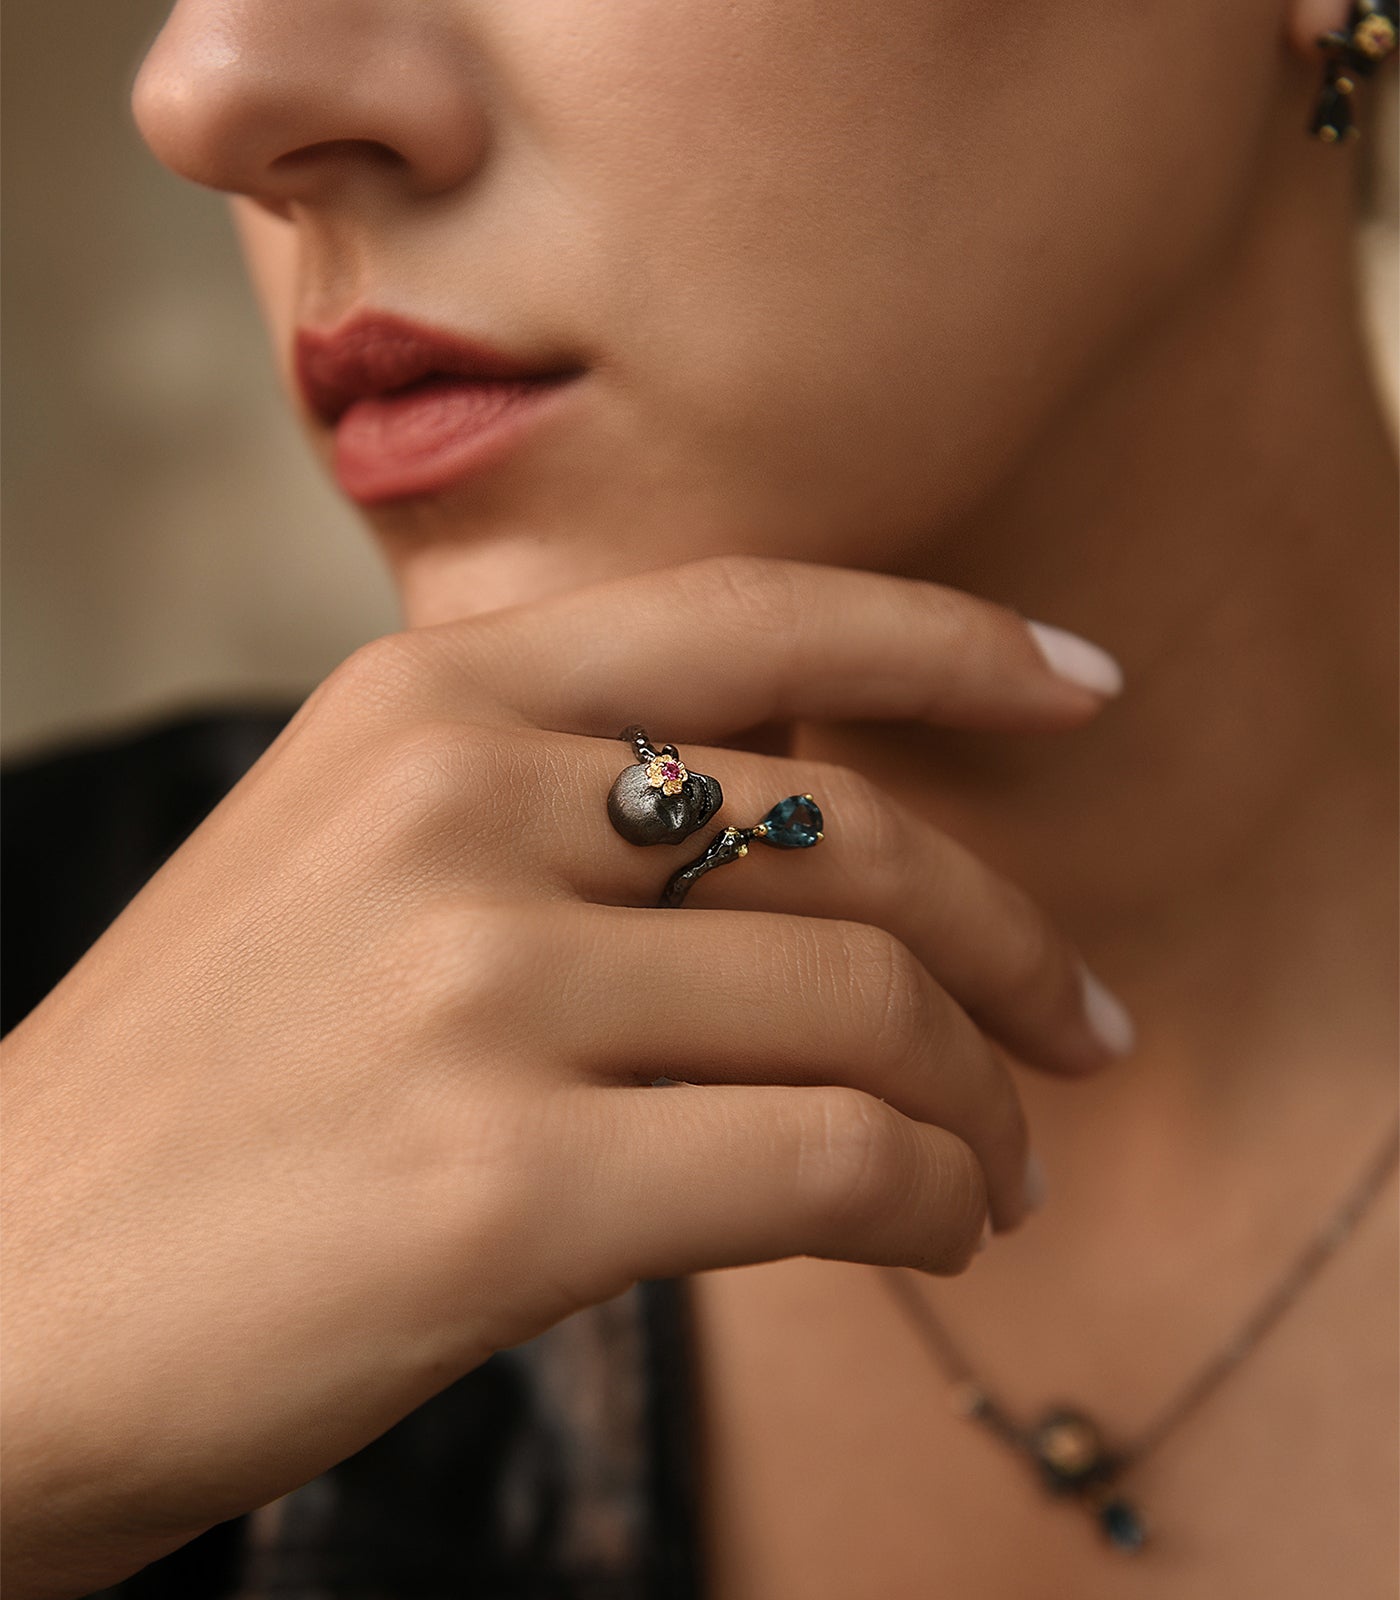 An oxidised sterling silver ring with an open band design featuring a skull with a pink ruby and blue topaz gemstone.